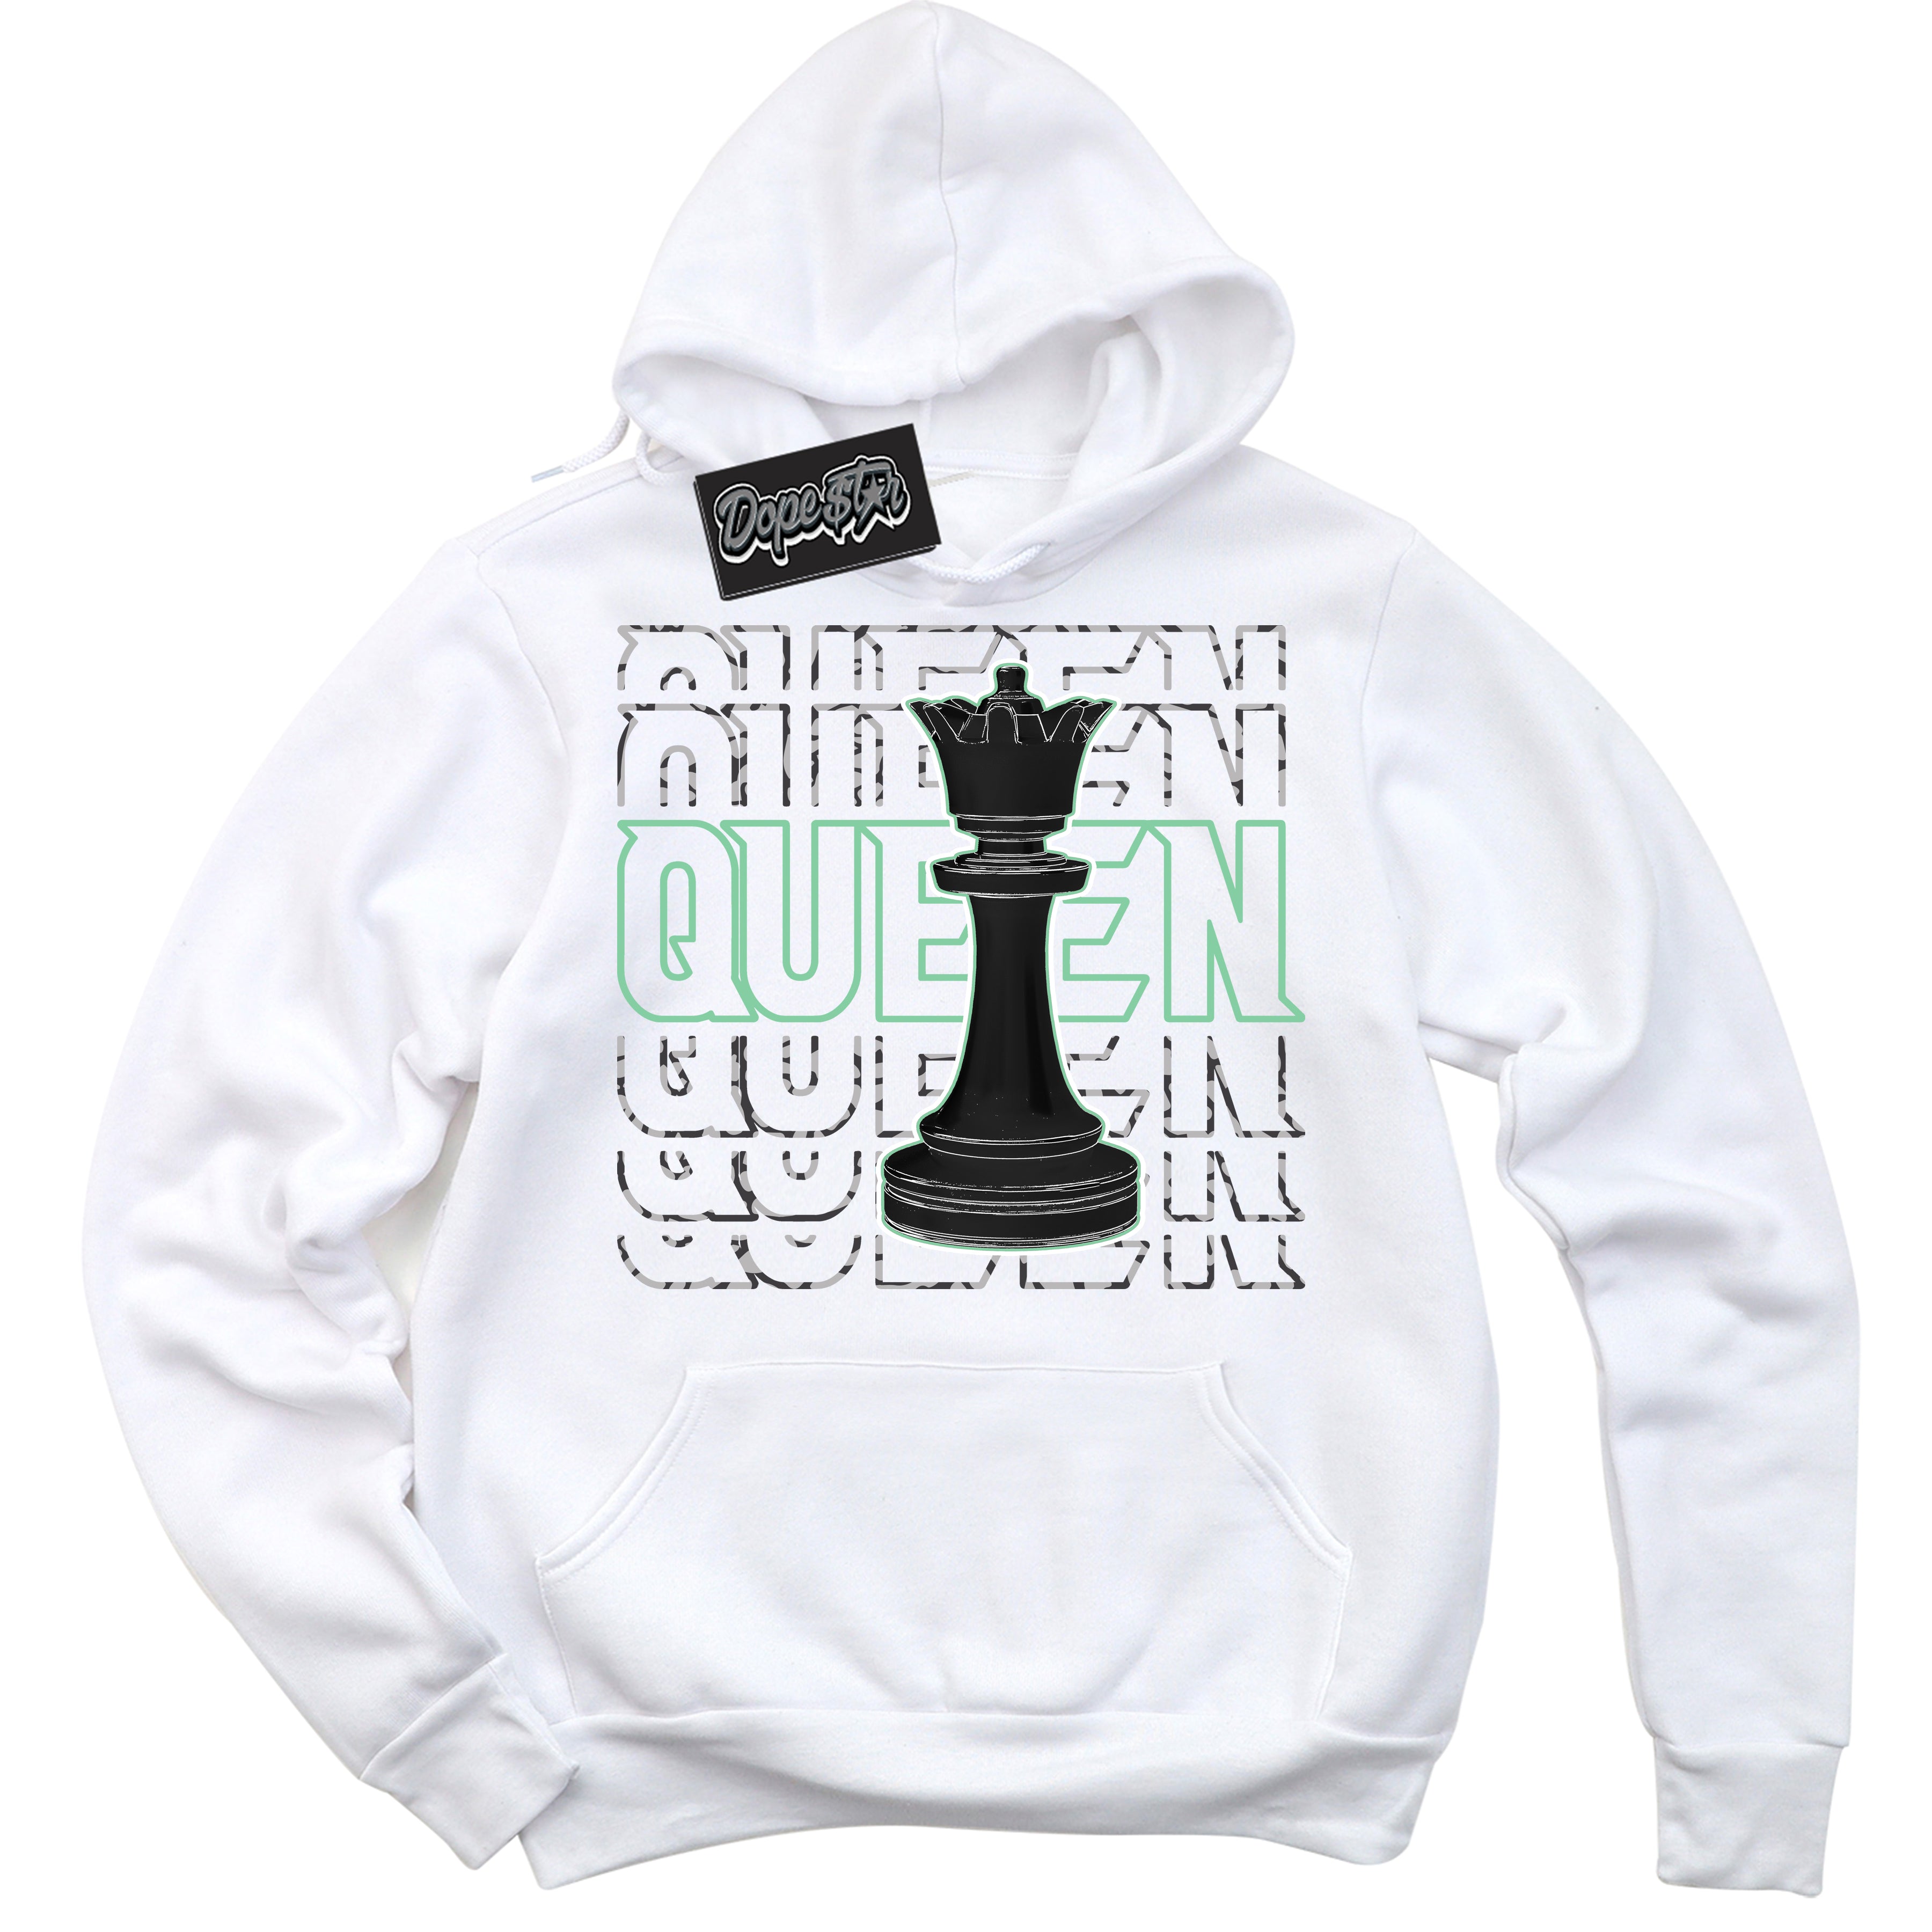 Cool White Graphic DopeStar Hoodie with “ Queen Chess “ print, that perfectly matches Green Glow 3s sneakers